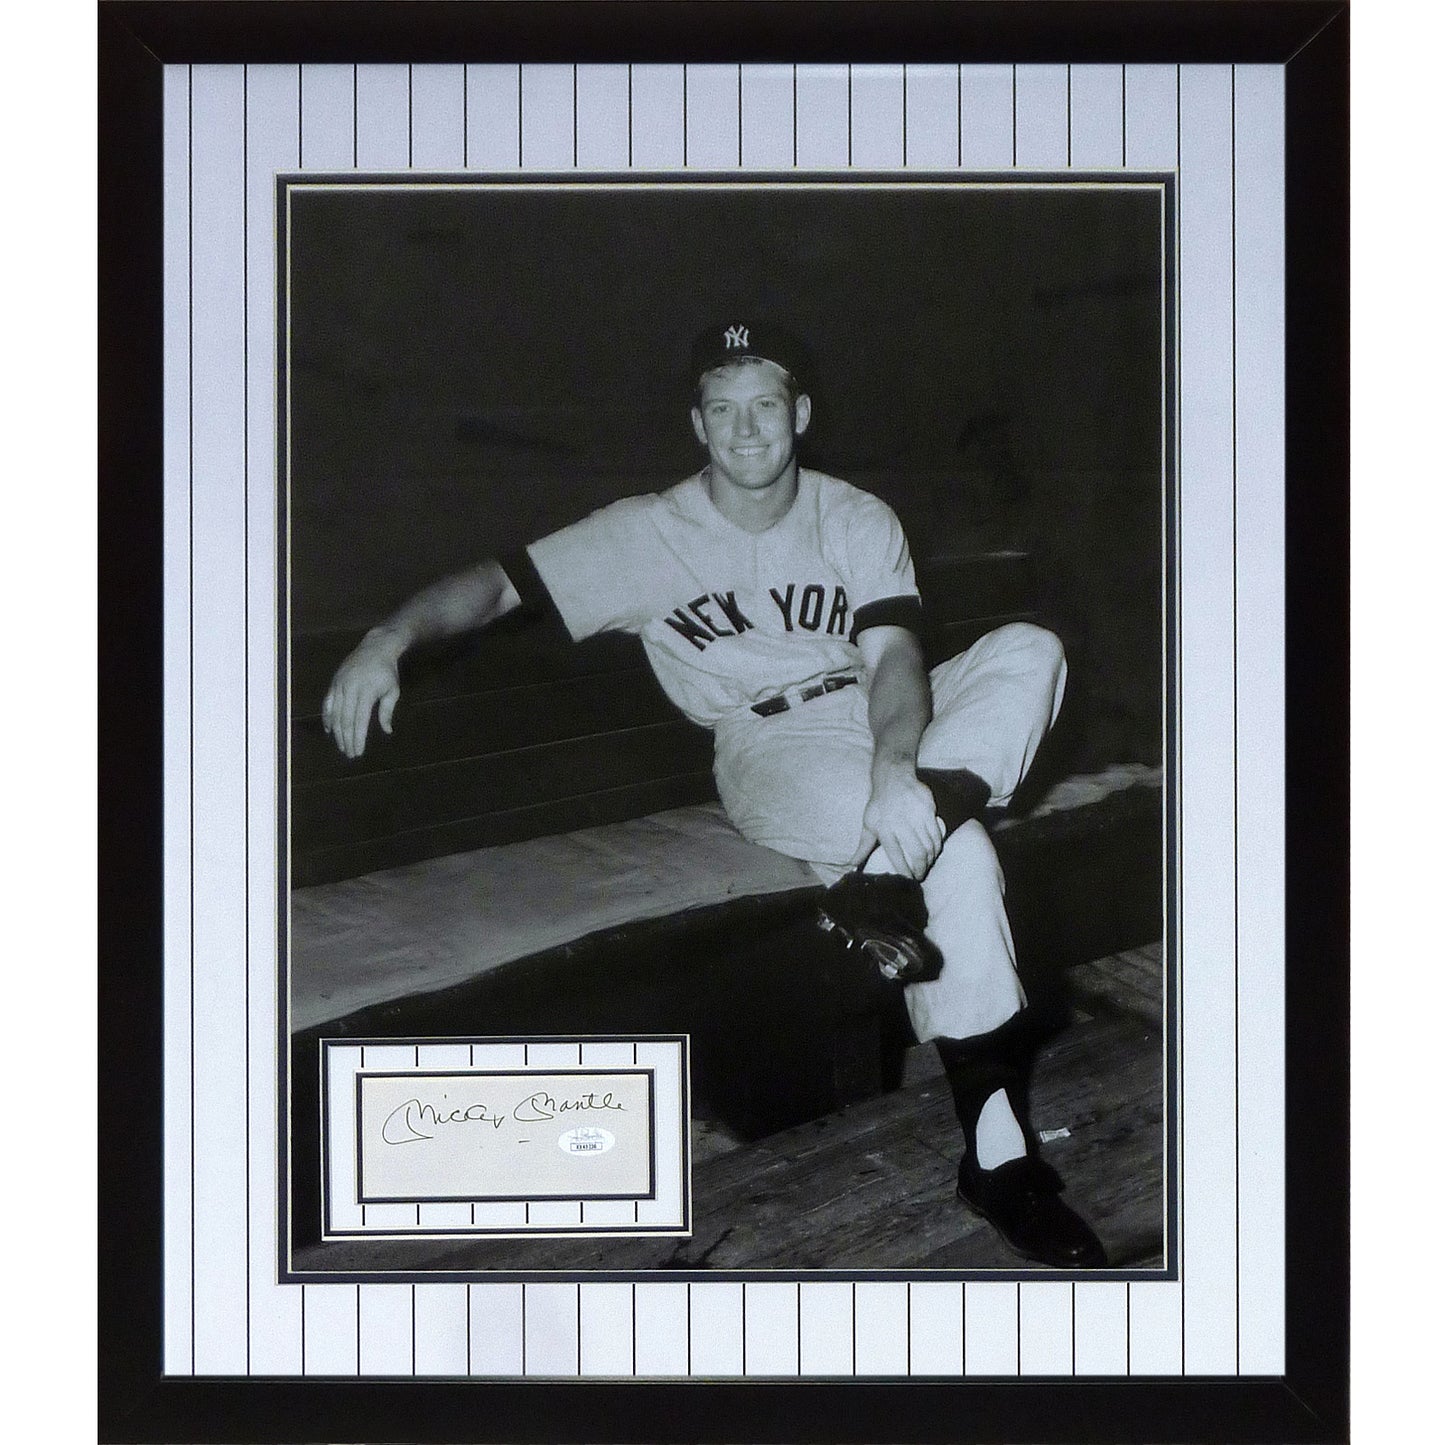 Mickey Mantle Autographed New York Yankees Deluxe Framed Piece with 16x20 Photo - JSA Full Letter